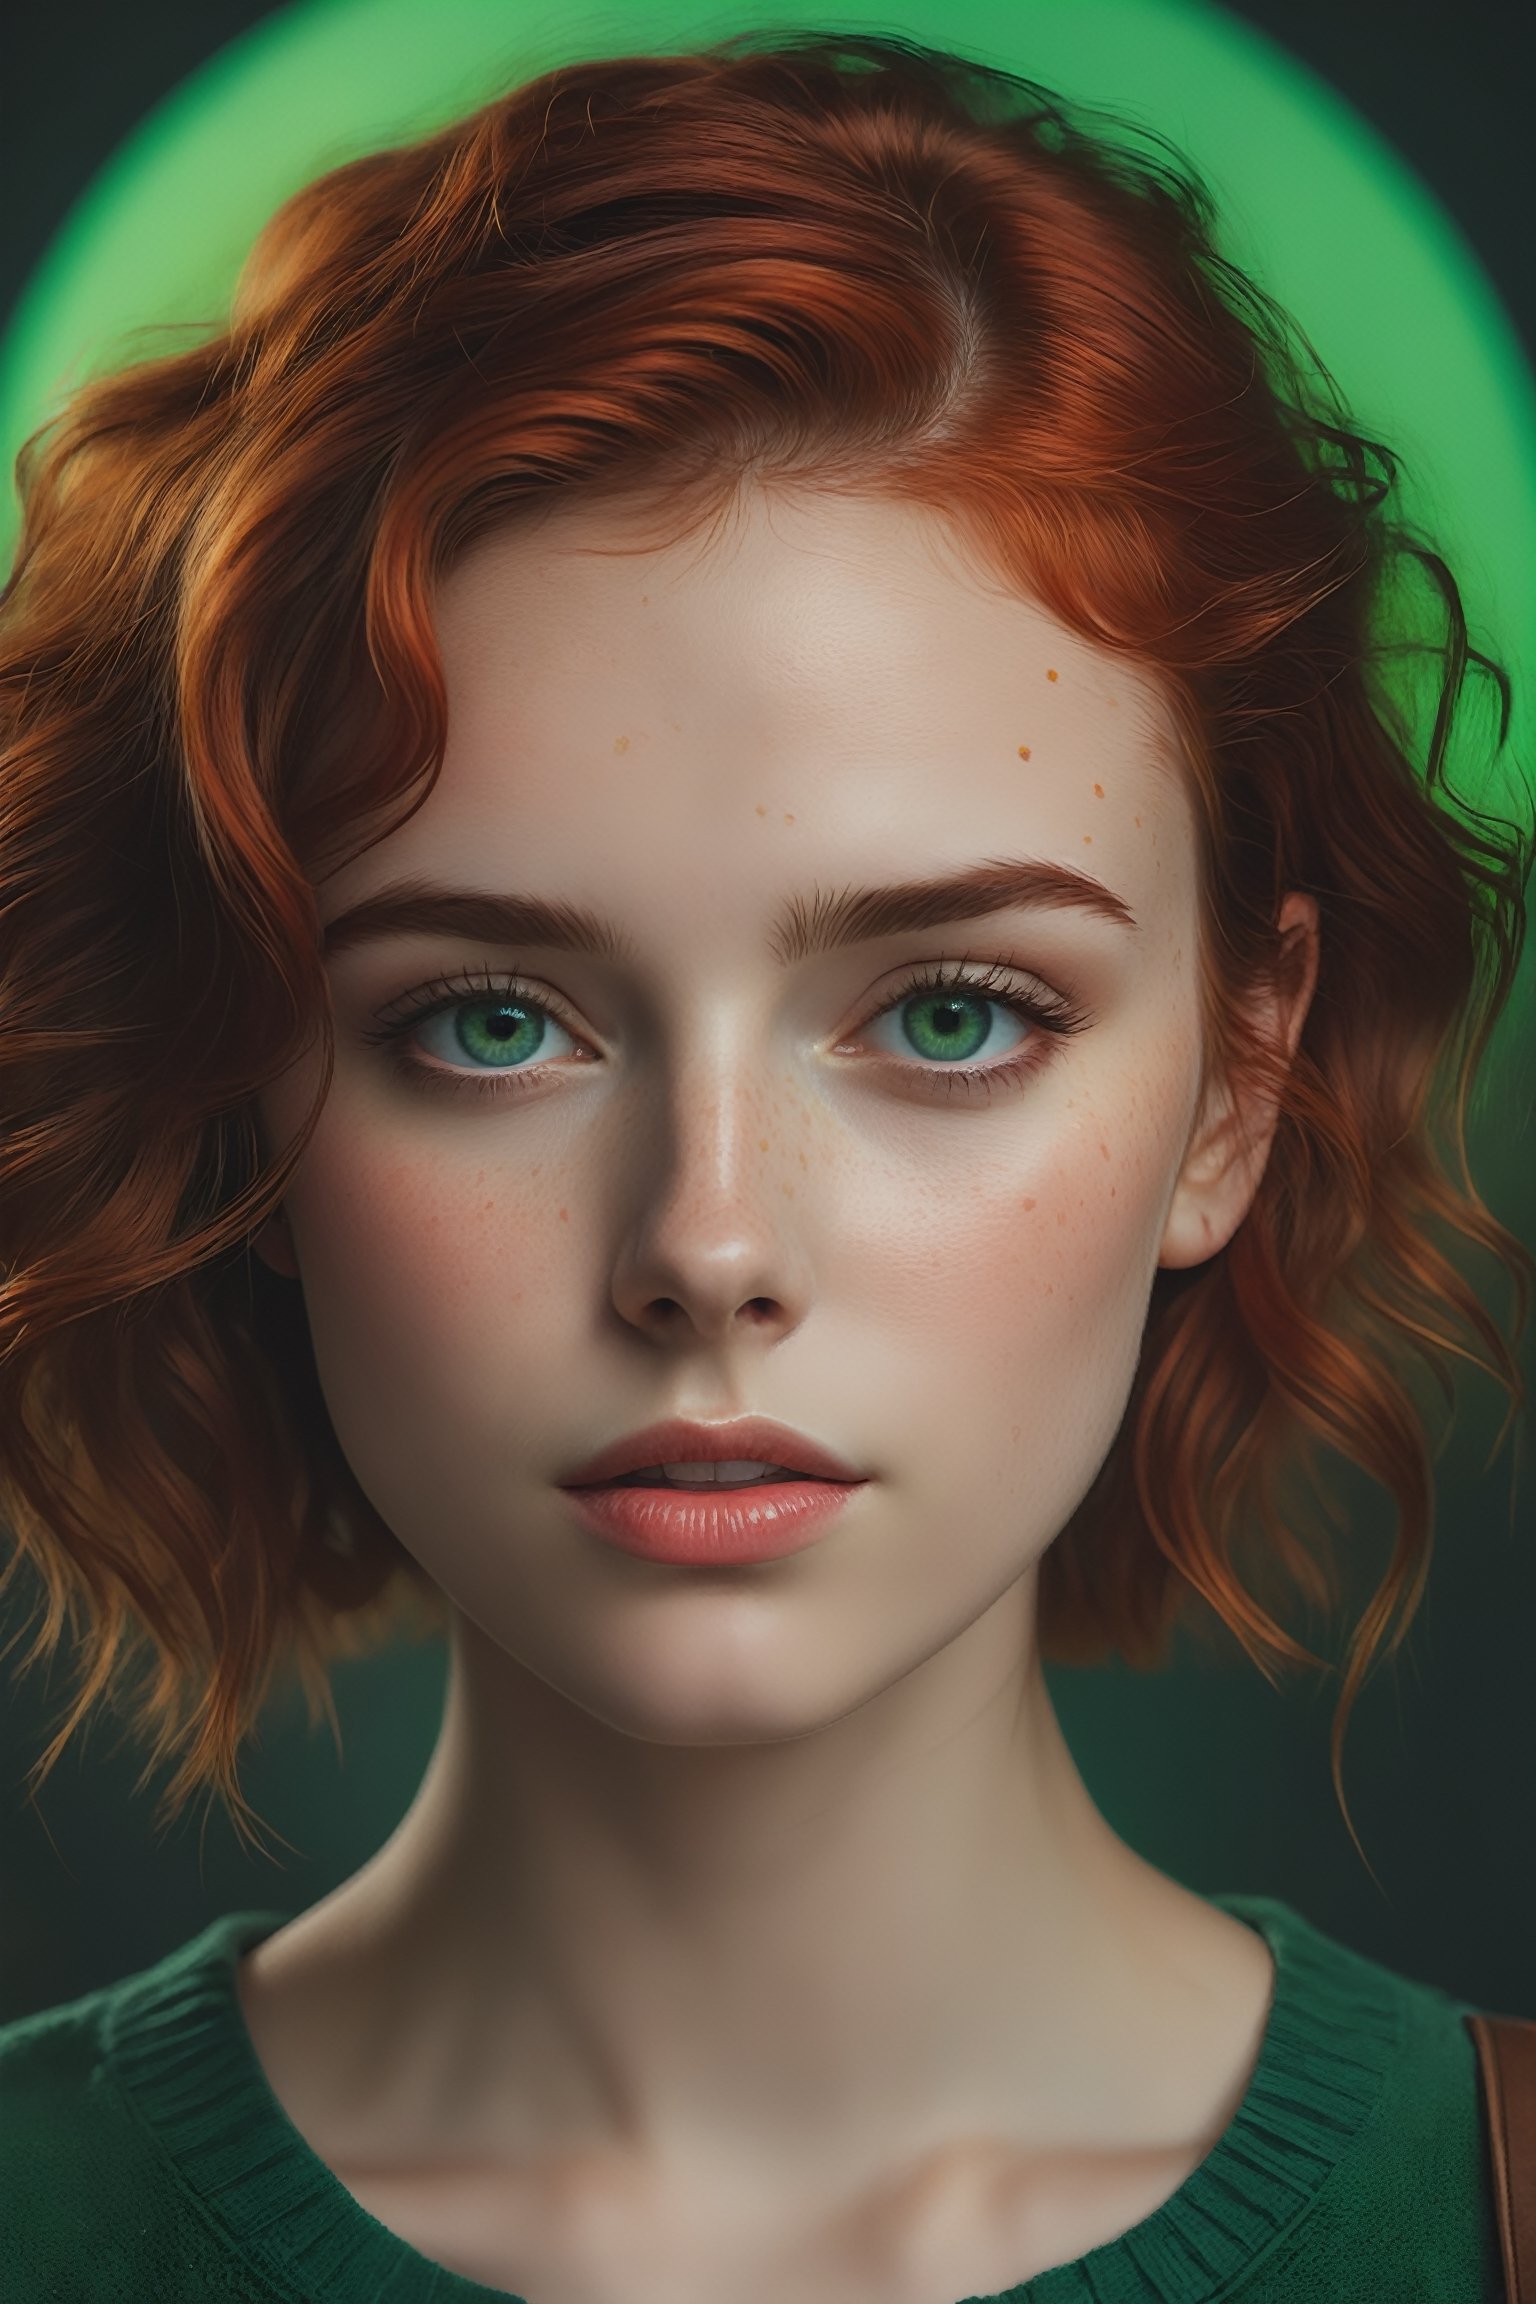 raw realistic potarait of beautiful girlA short, petite frame. Hair so red and wavy falling just past her shoulders, surrounding a circular face with softness, light freckles on her nose, naturally arched red eyebrows over bright green eyes that looked almost blue in some lights., indoor background grainy cinematic, godlyphoto r3al,detailmaster2,aesthetic portrait, cinematic colors, earthy , moody, look , grainy cinematic, fantasy vibes godlyphoto r3al,detailmaster2,aesthetic portrait, cinematic colors, earthy 